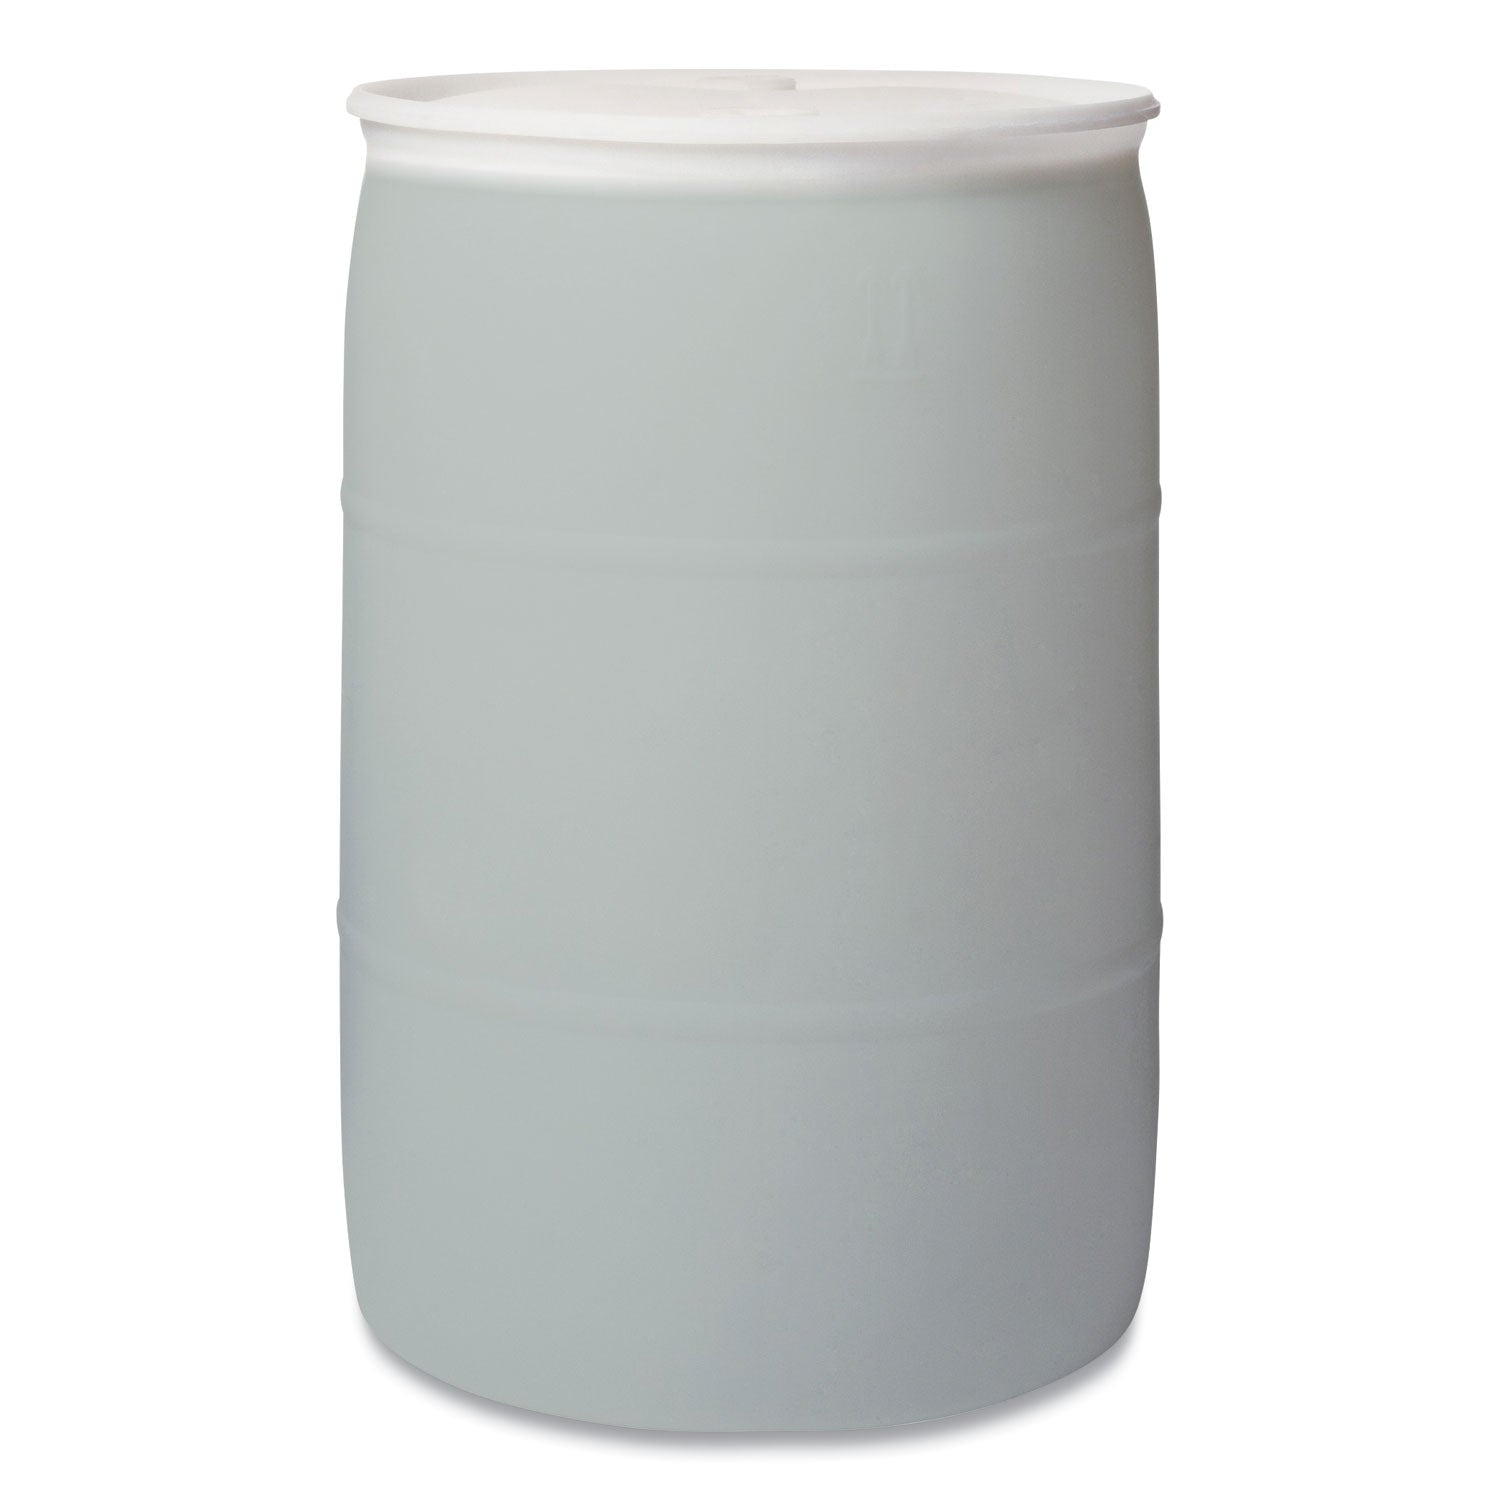 Industrial Cleaner and Degreaser, Concentrated, 55 gal Drum - 